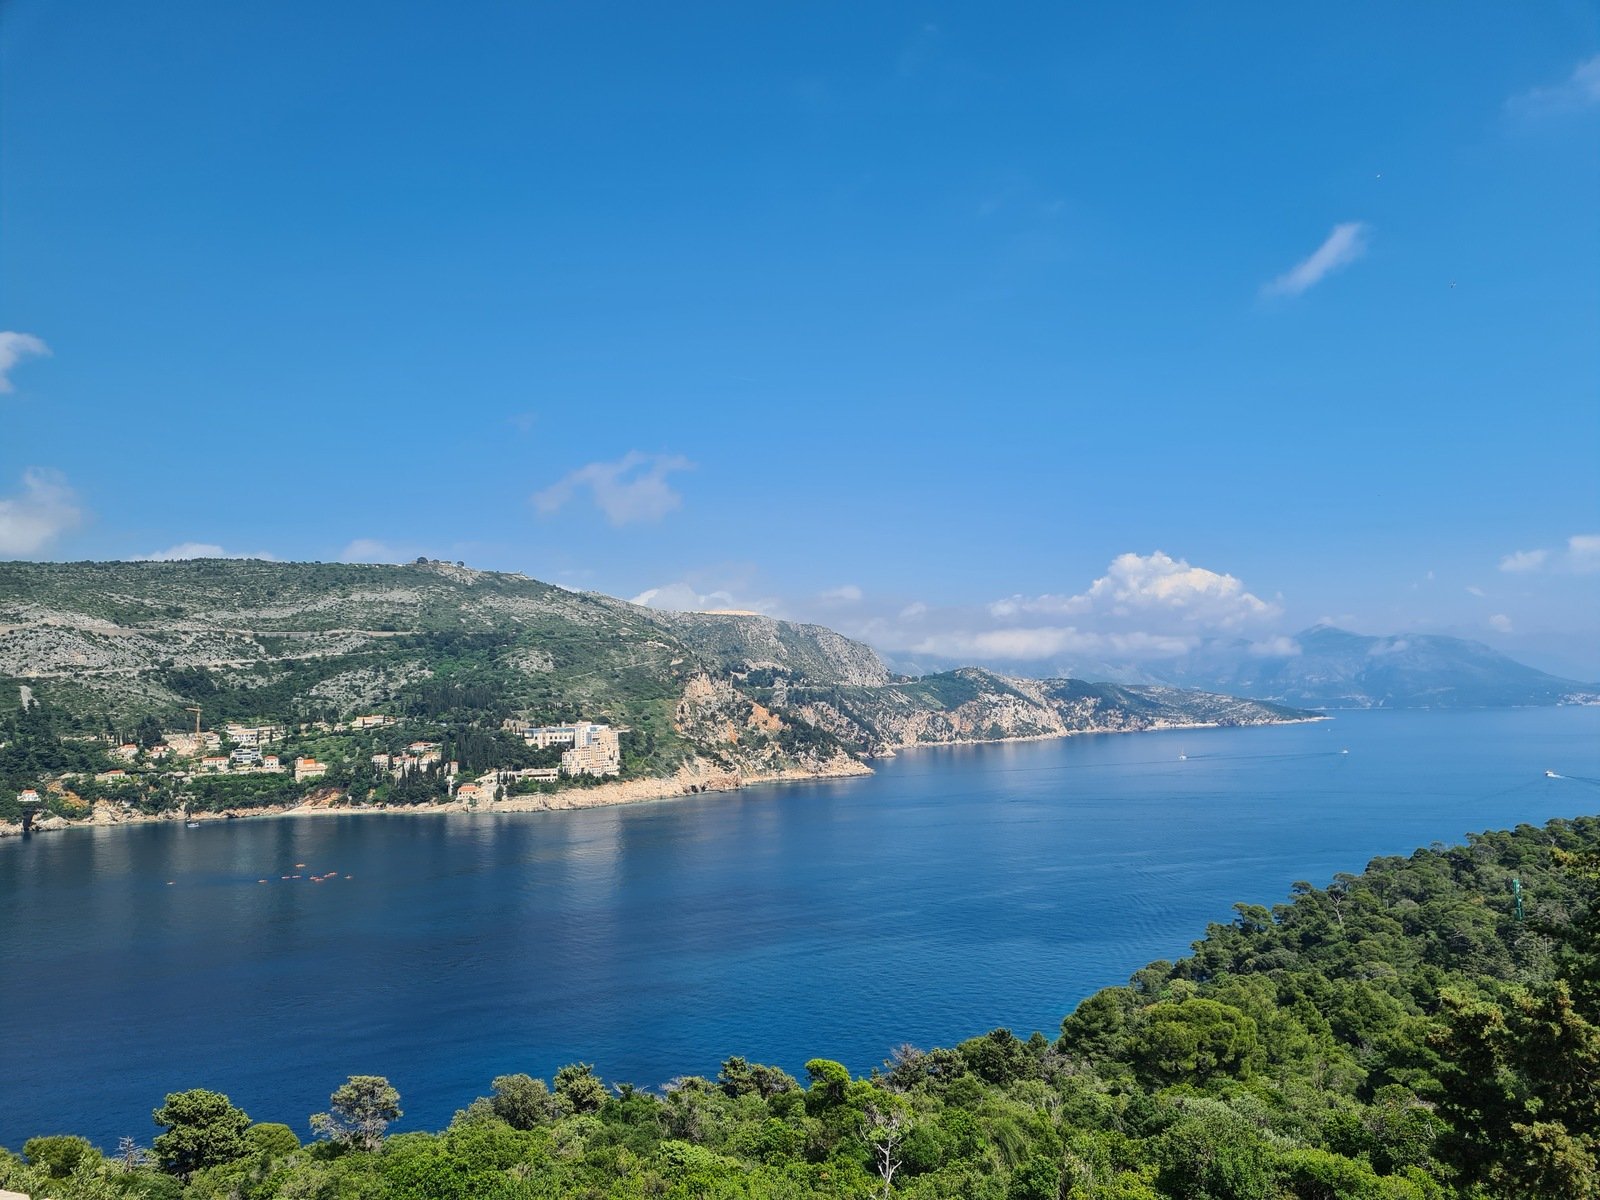 A viewpoint from an island just off the coast of Croatia, looking down the coast of rocky cliffs and greenery next to the blue sea